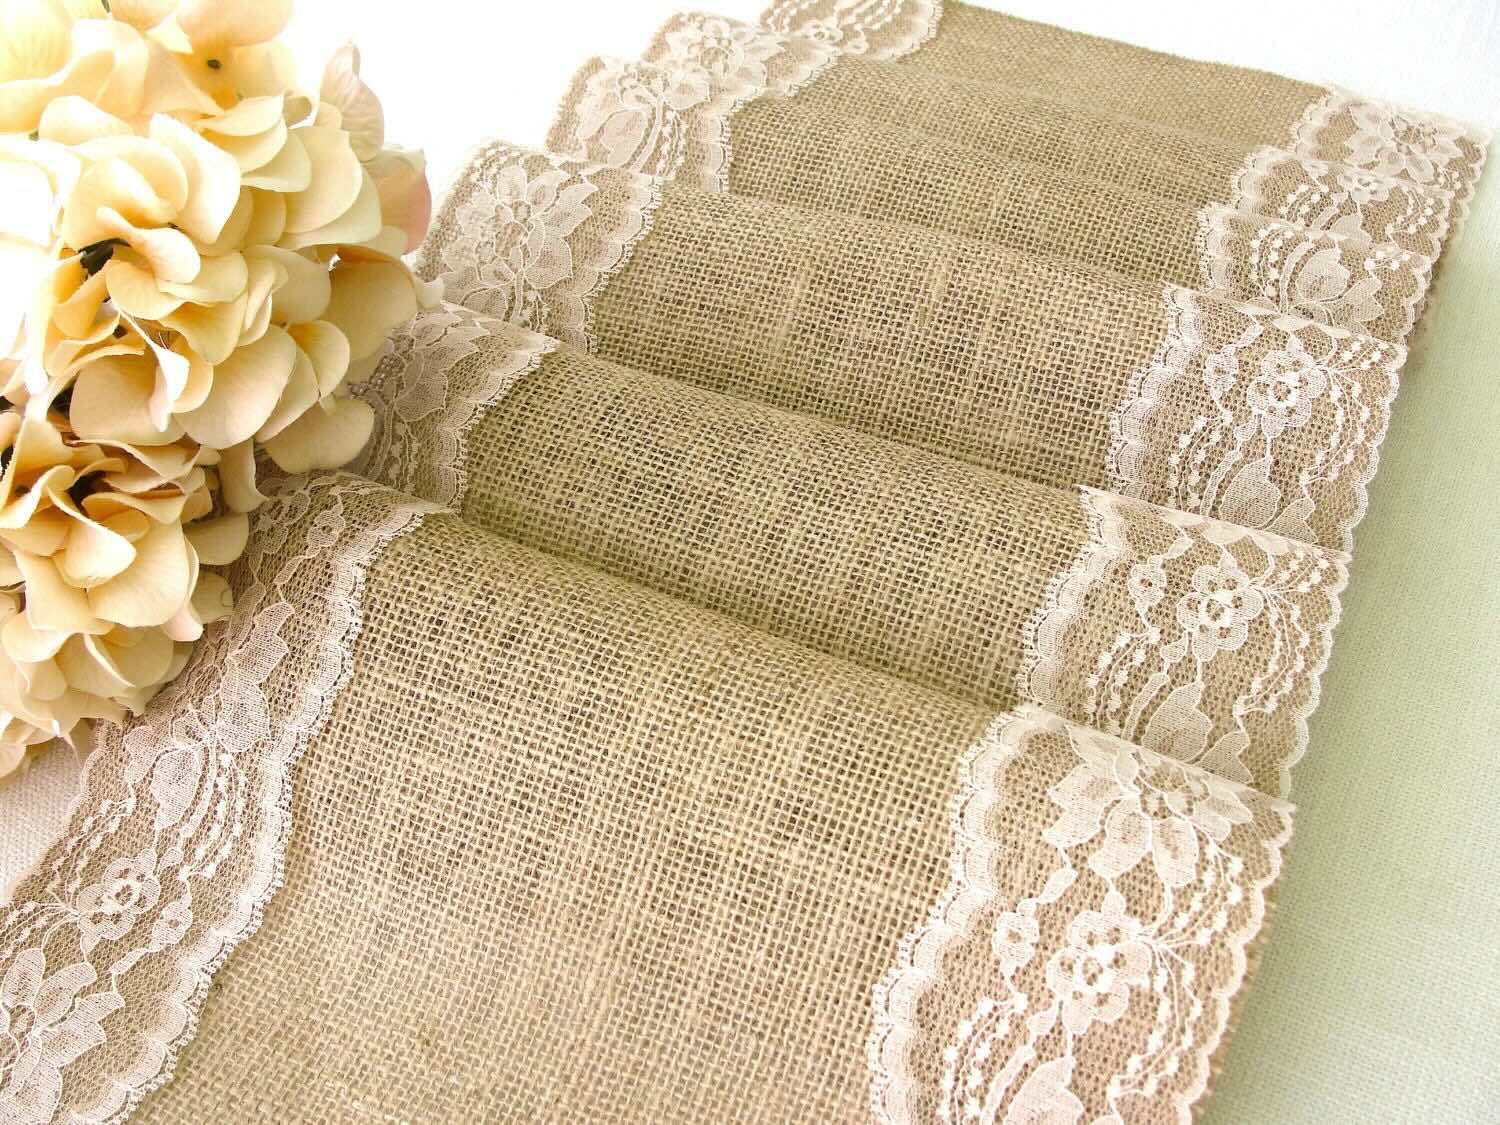 How To Make Burlap Table Runners With Lace